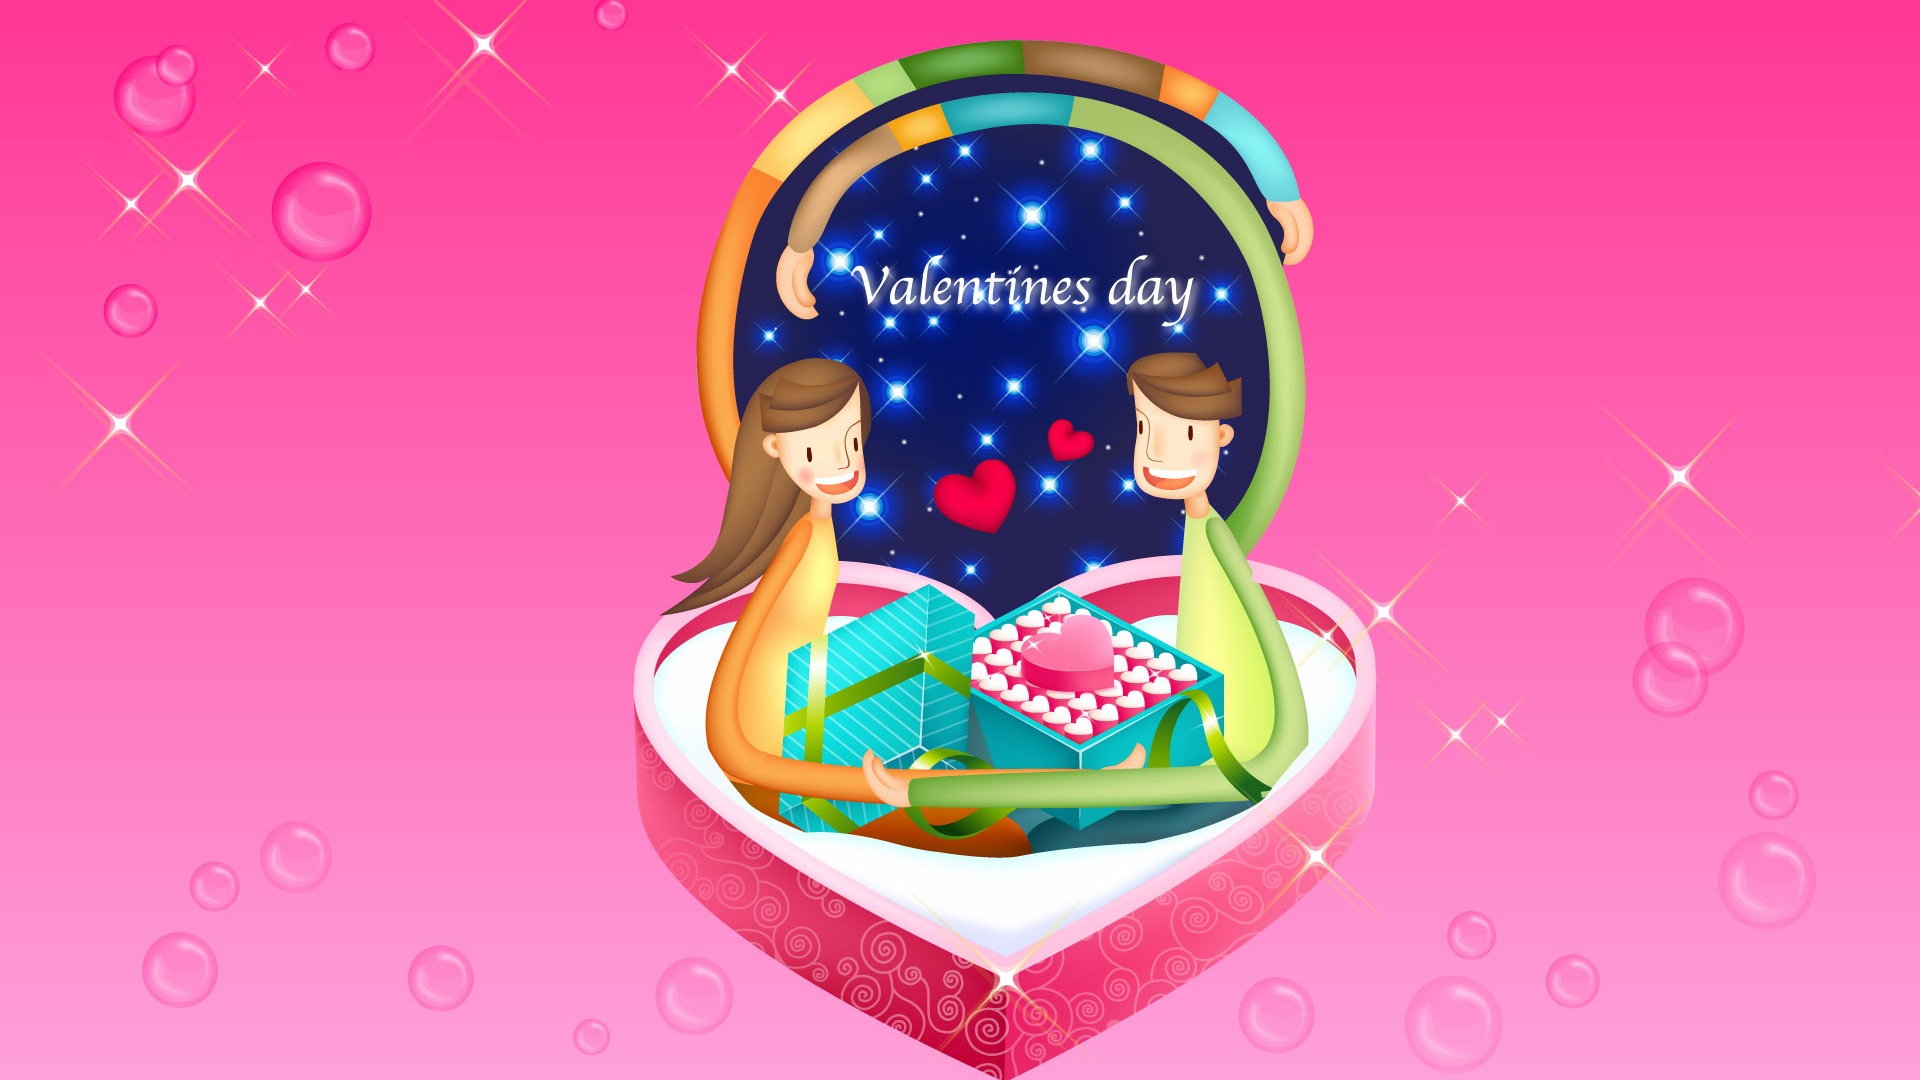 Valentine's Day Theme Wallpapers (2) #13 - 1920x1080